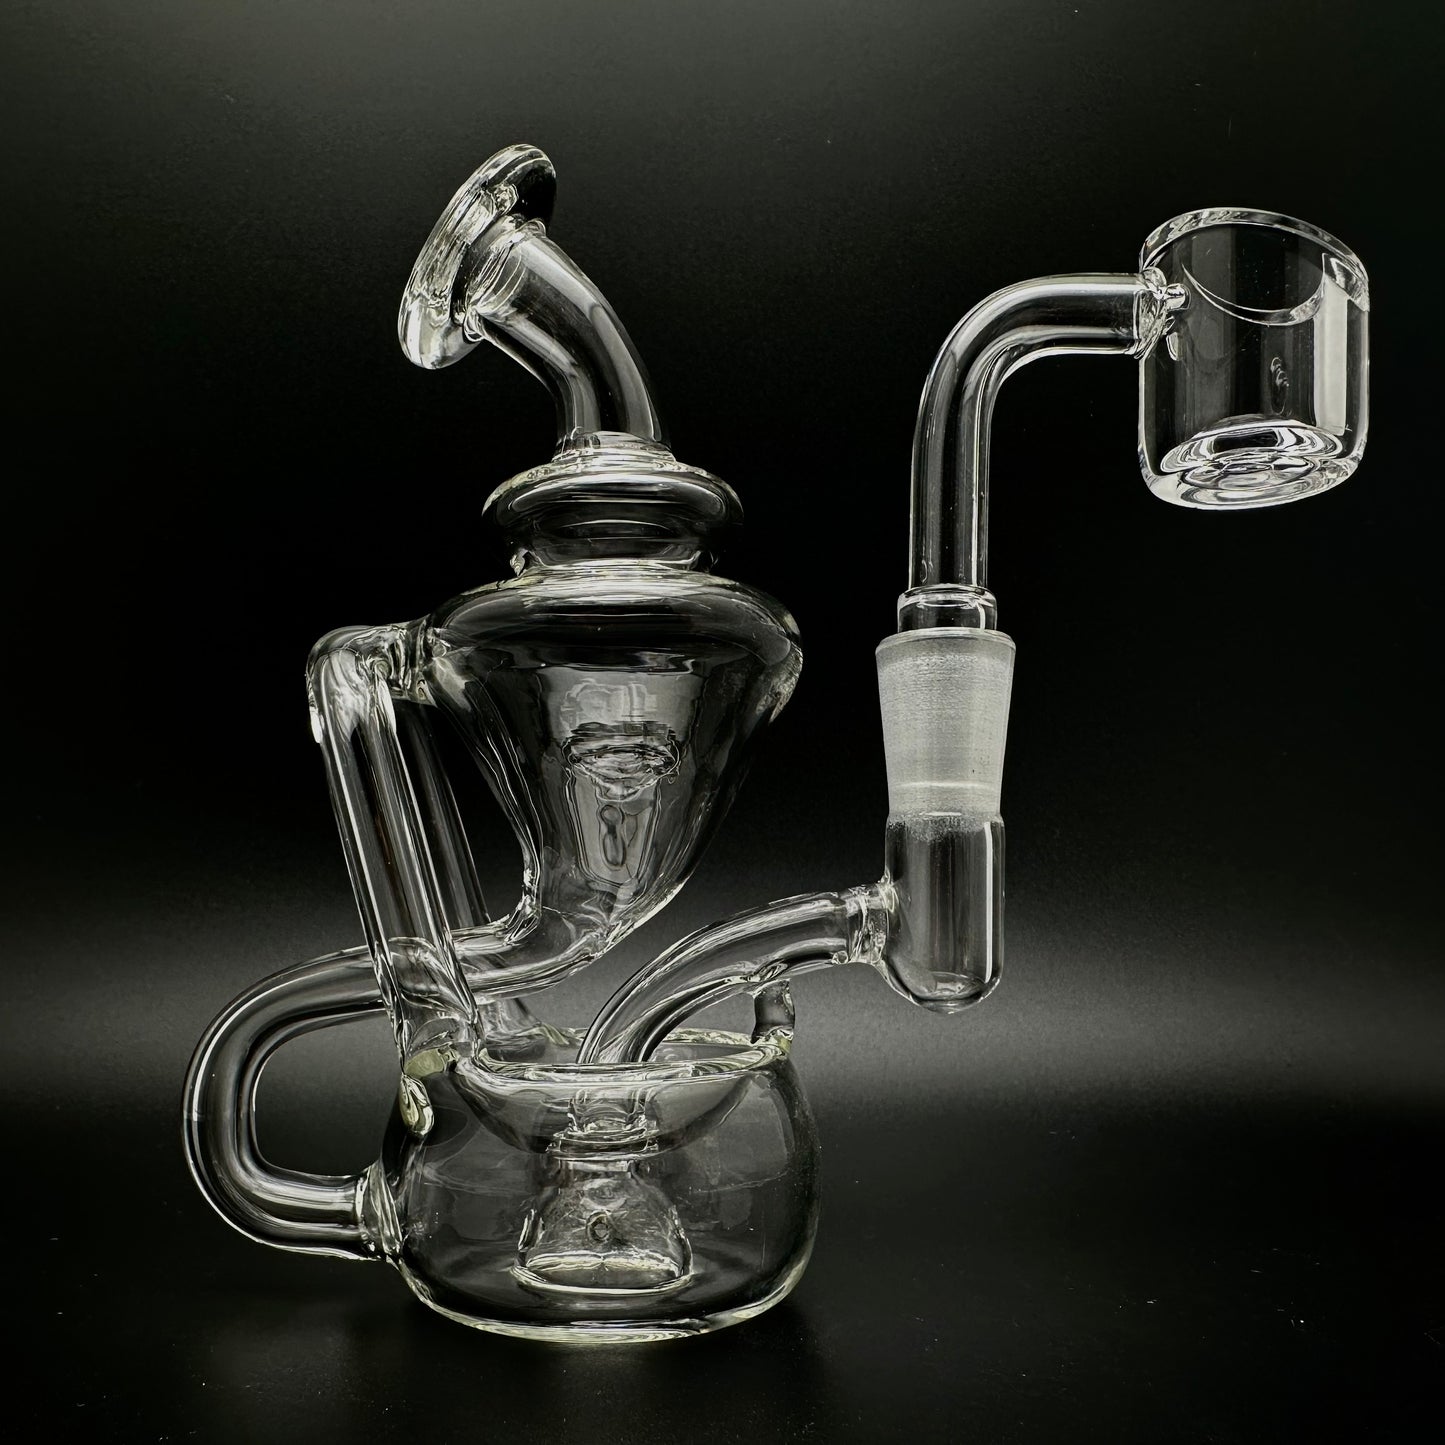 recycler dab rig